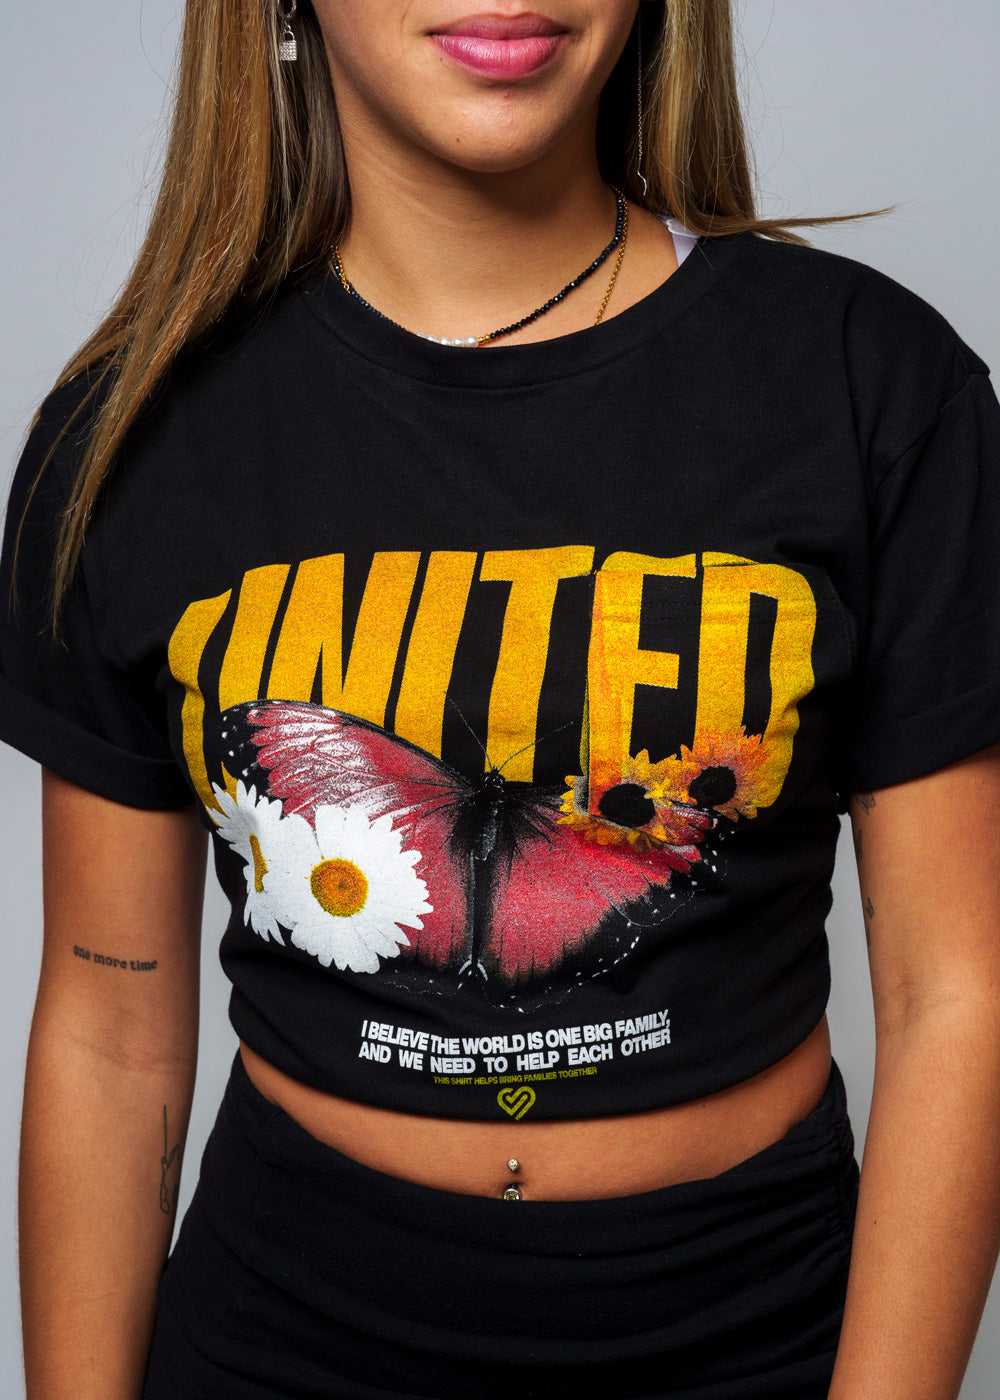 The "United" Crop